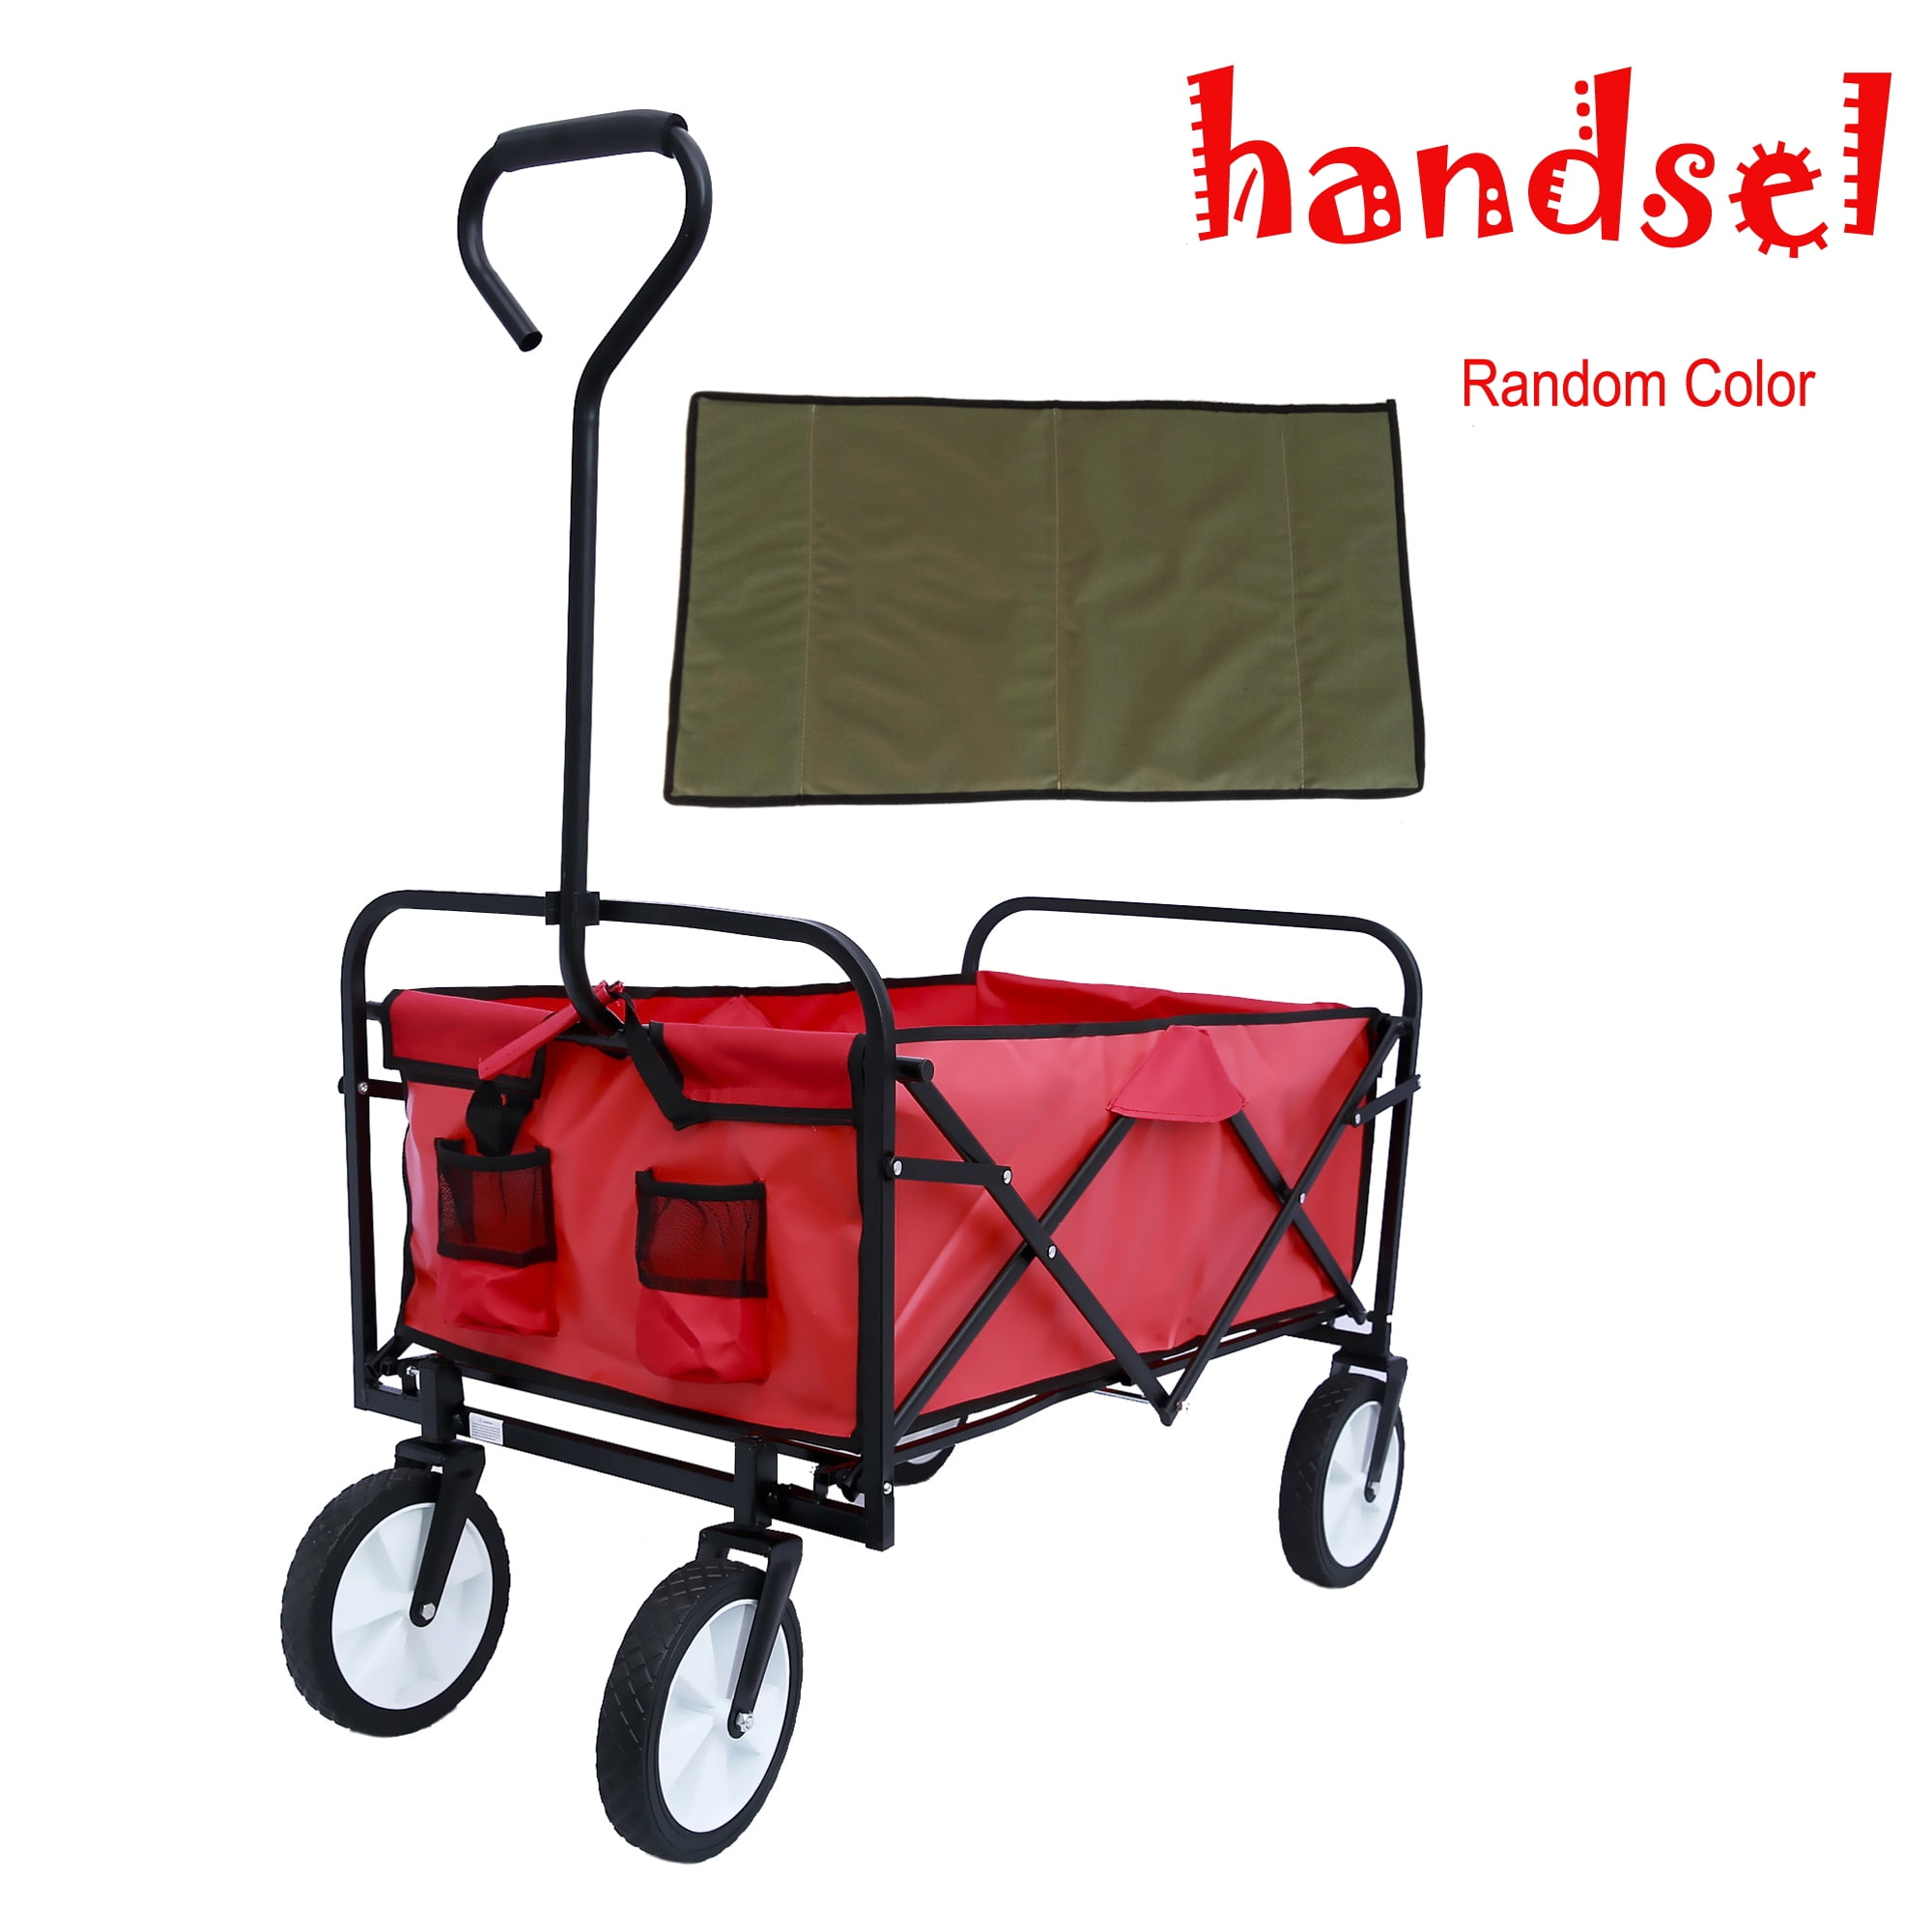 Heavy Duty Folding Garden Portable Hand Cart with 8“ All-Terrain Wheels and Drink Holder Ingala Collapsible Outdoor Utility Wagon Garden Sports Adjustable Handles and Double Fabric for Beach 